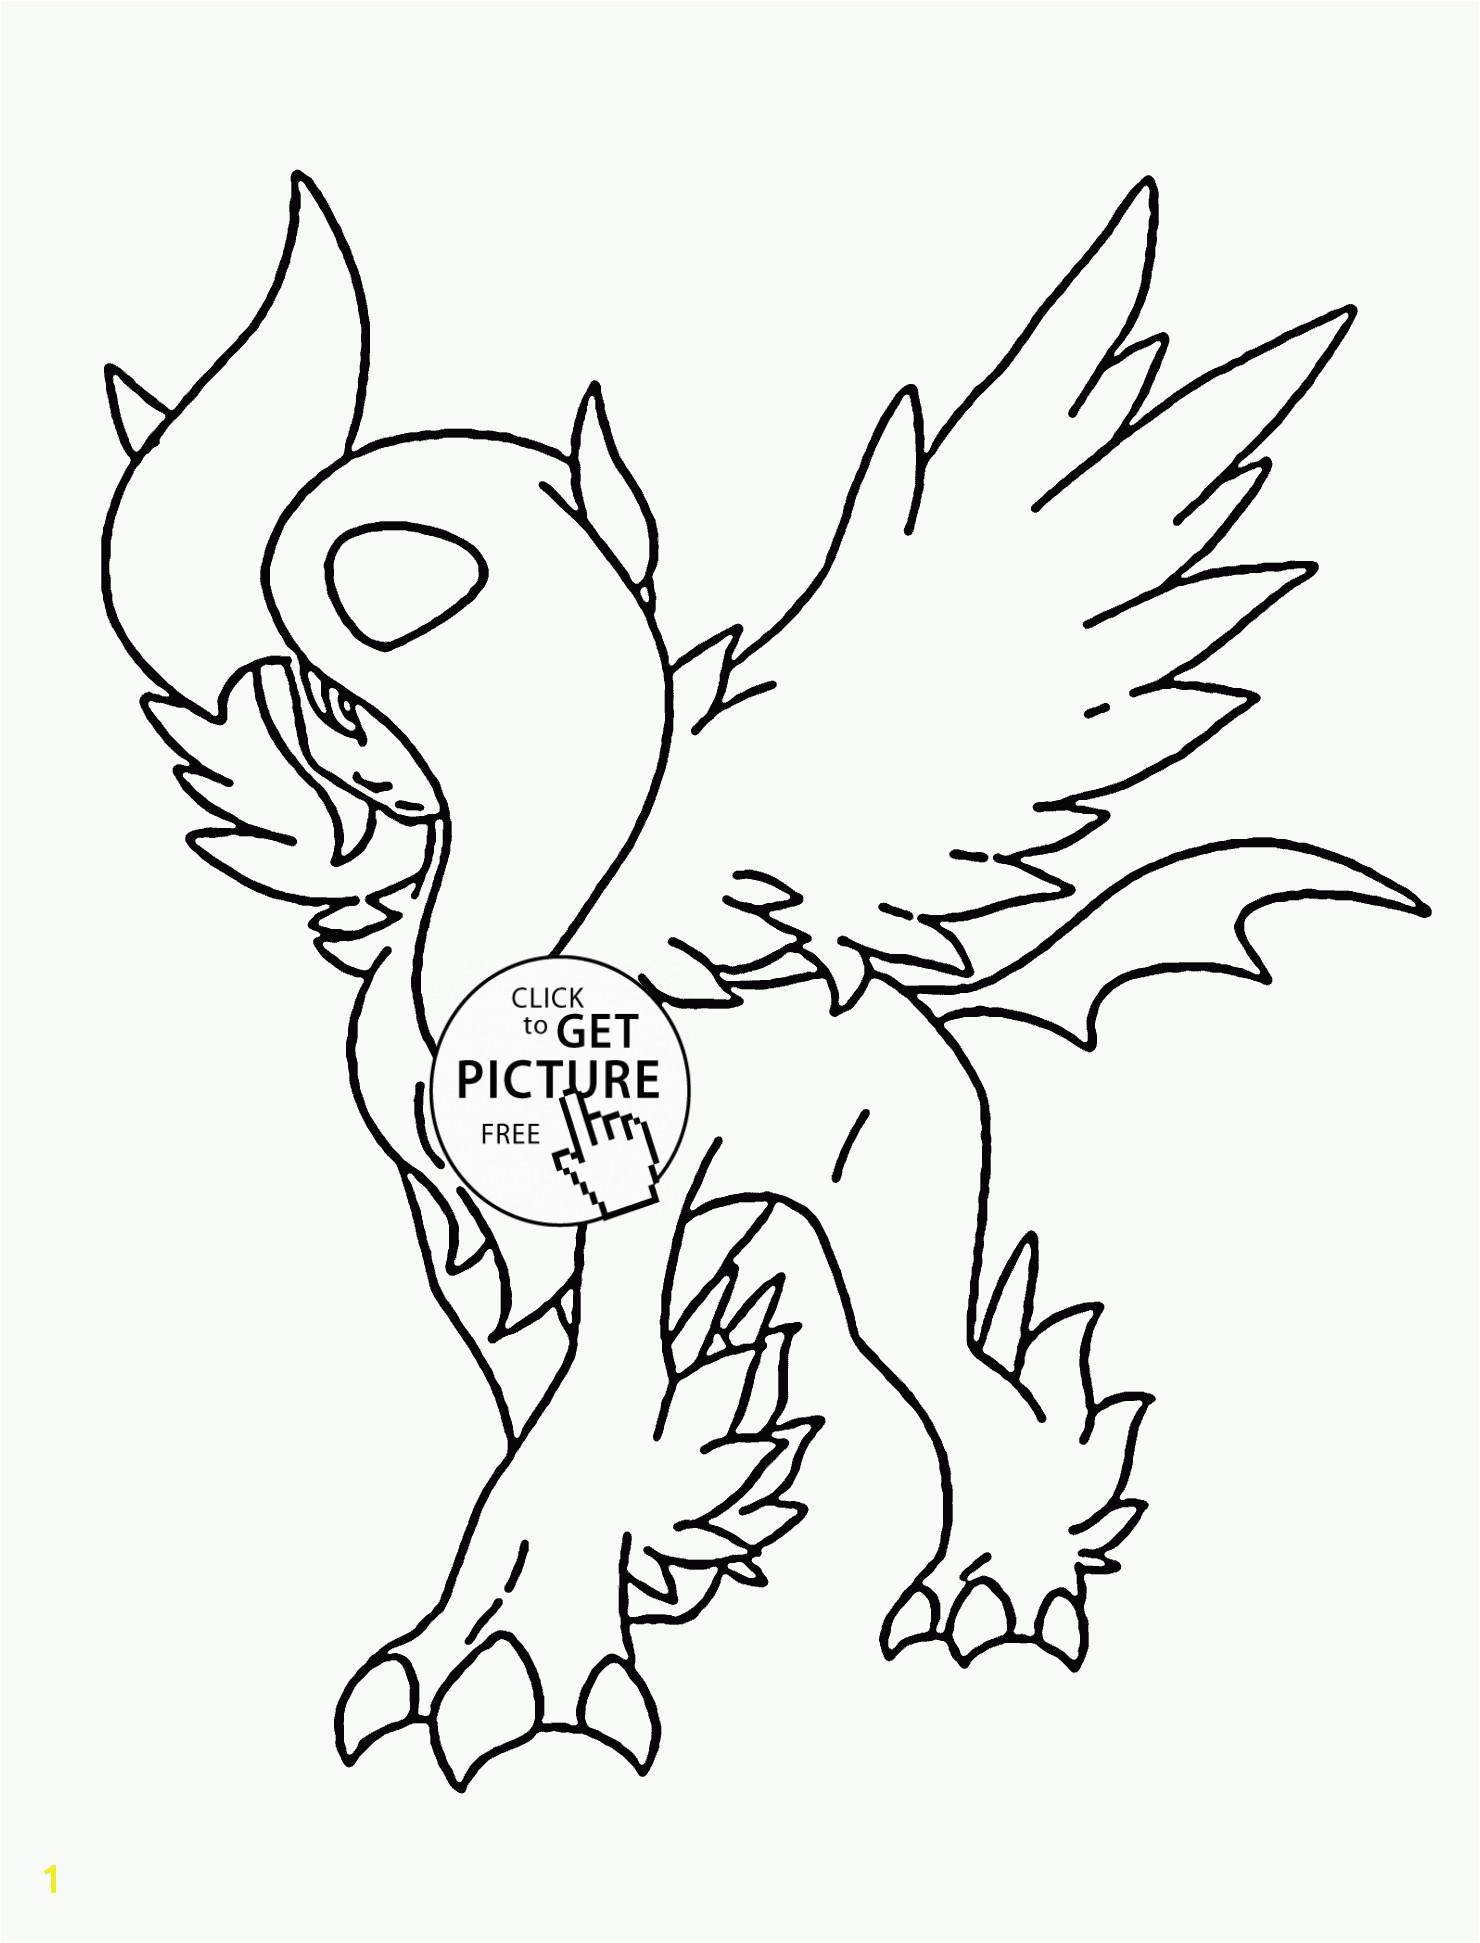 Coloring Pages Of Greninja Coloring Pages Greninja Innovative ash Greninja Coloring Pages